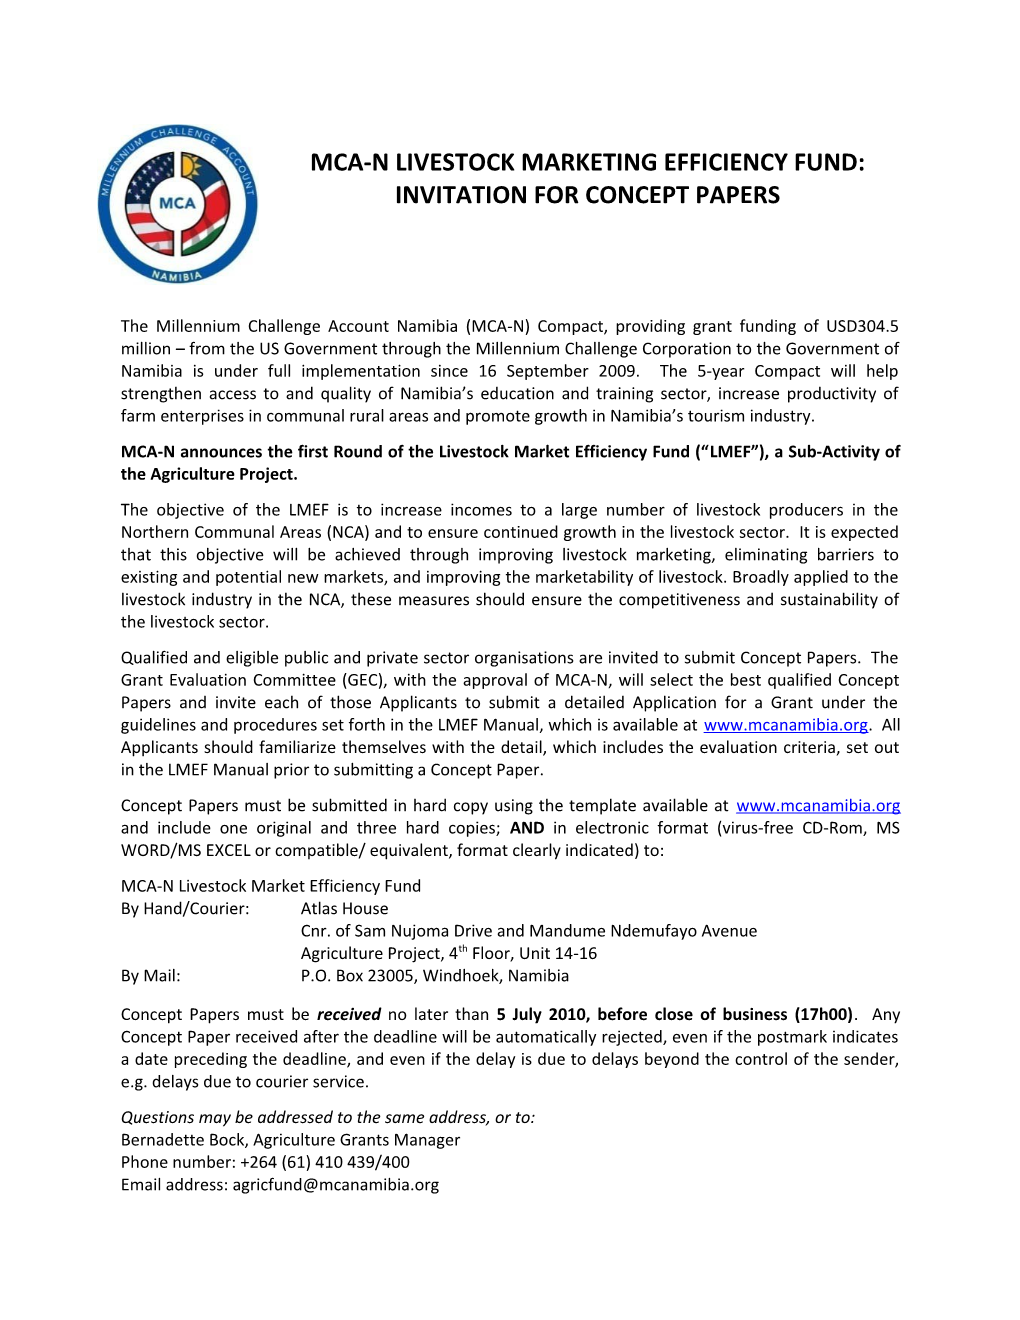 Mca-N Livestock Marketing Efficiency Fund: Invitation for Concept Papers